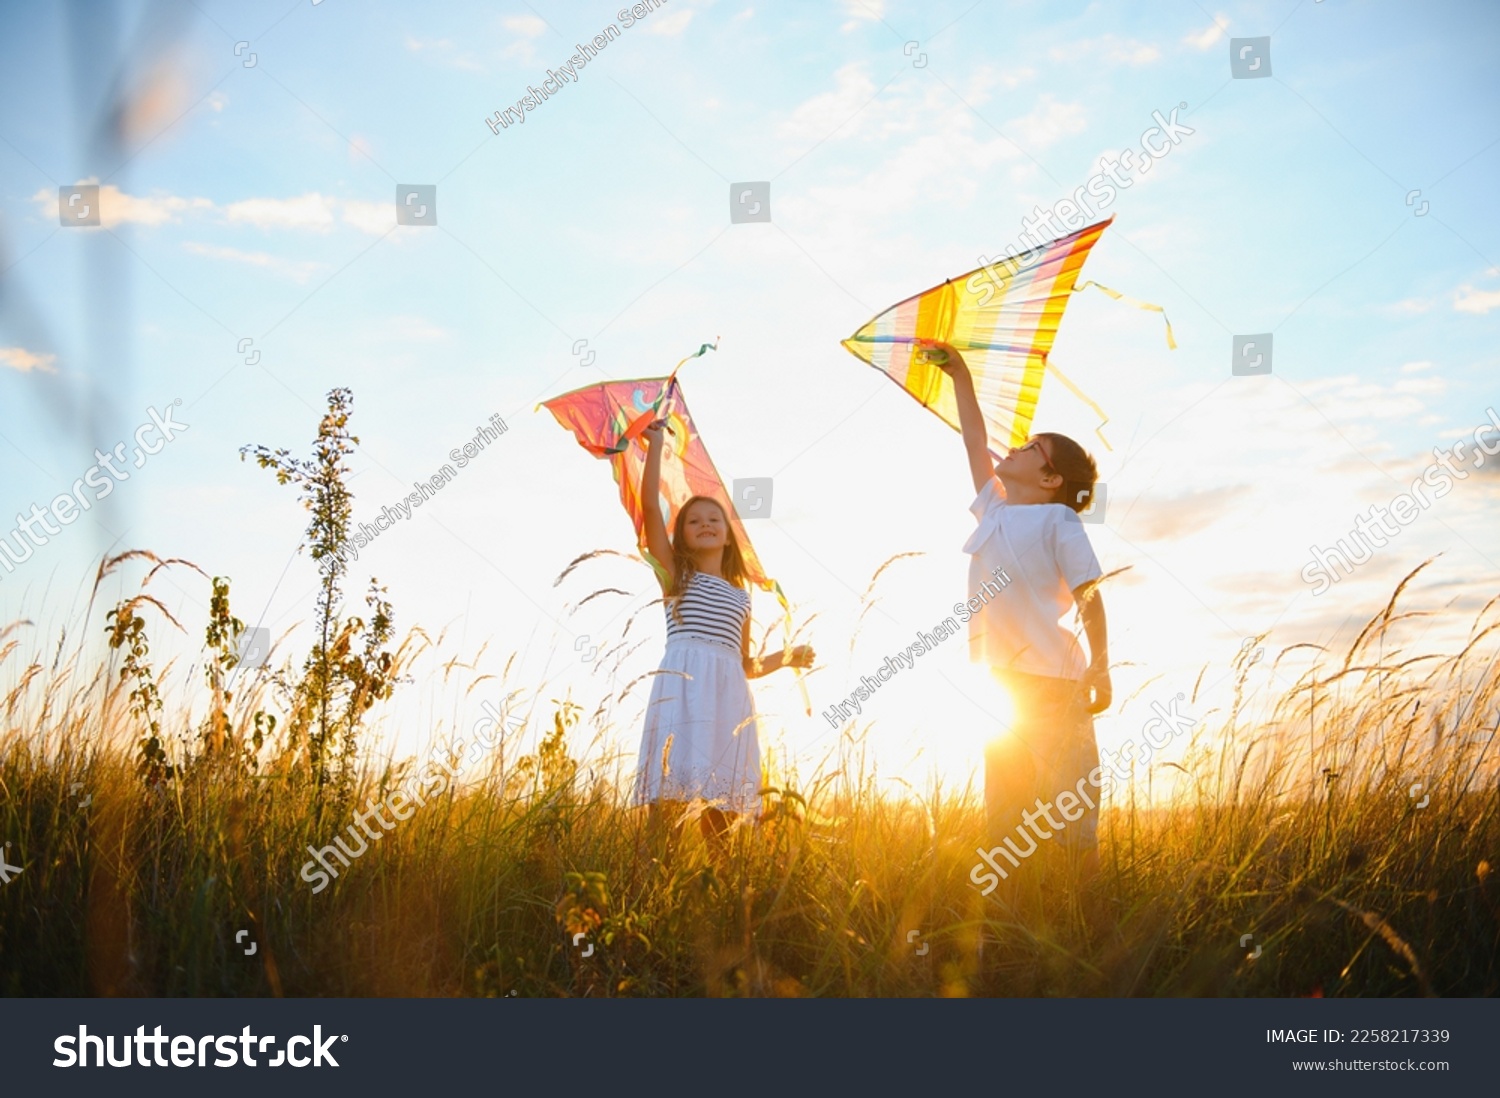 Happy boy and girl playing with kites in field at sunset. Happy childhood concept #2258217339